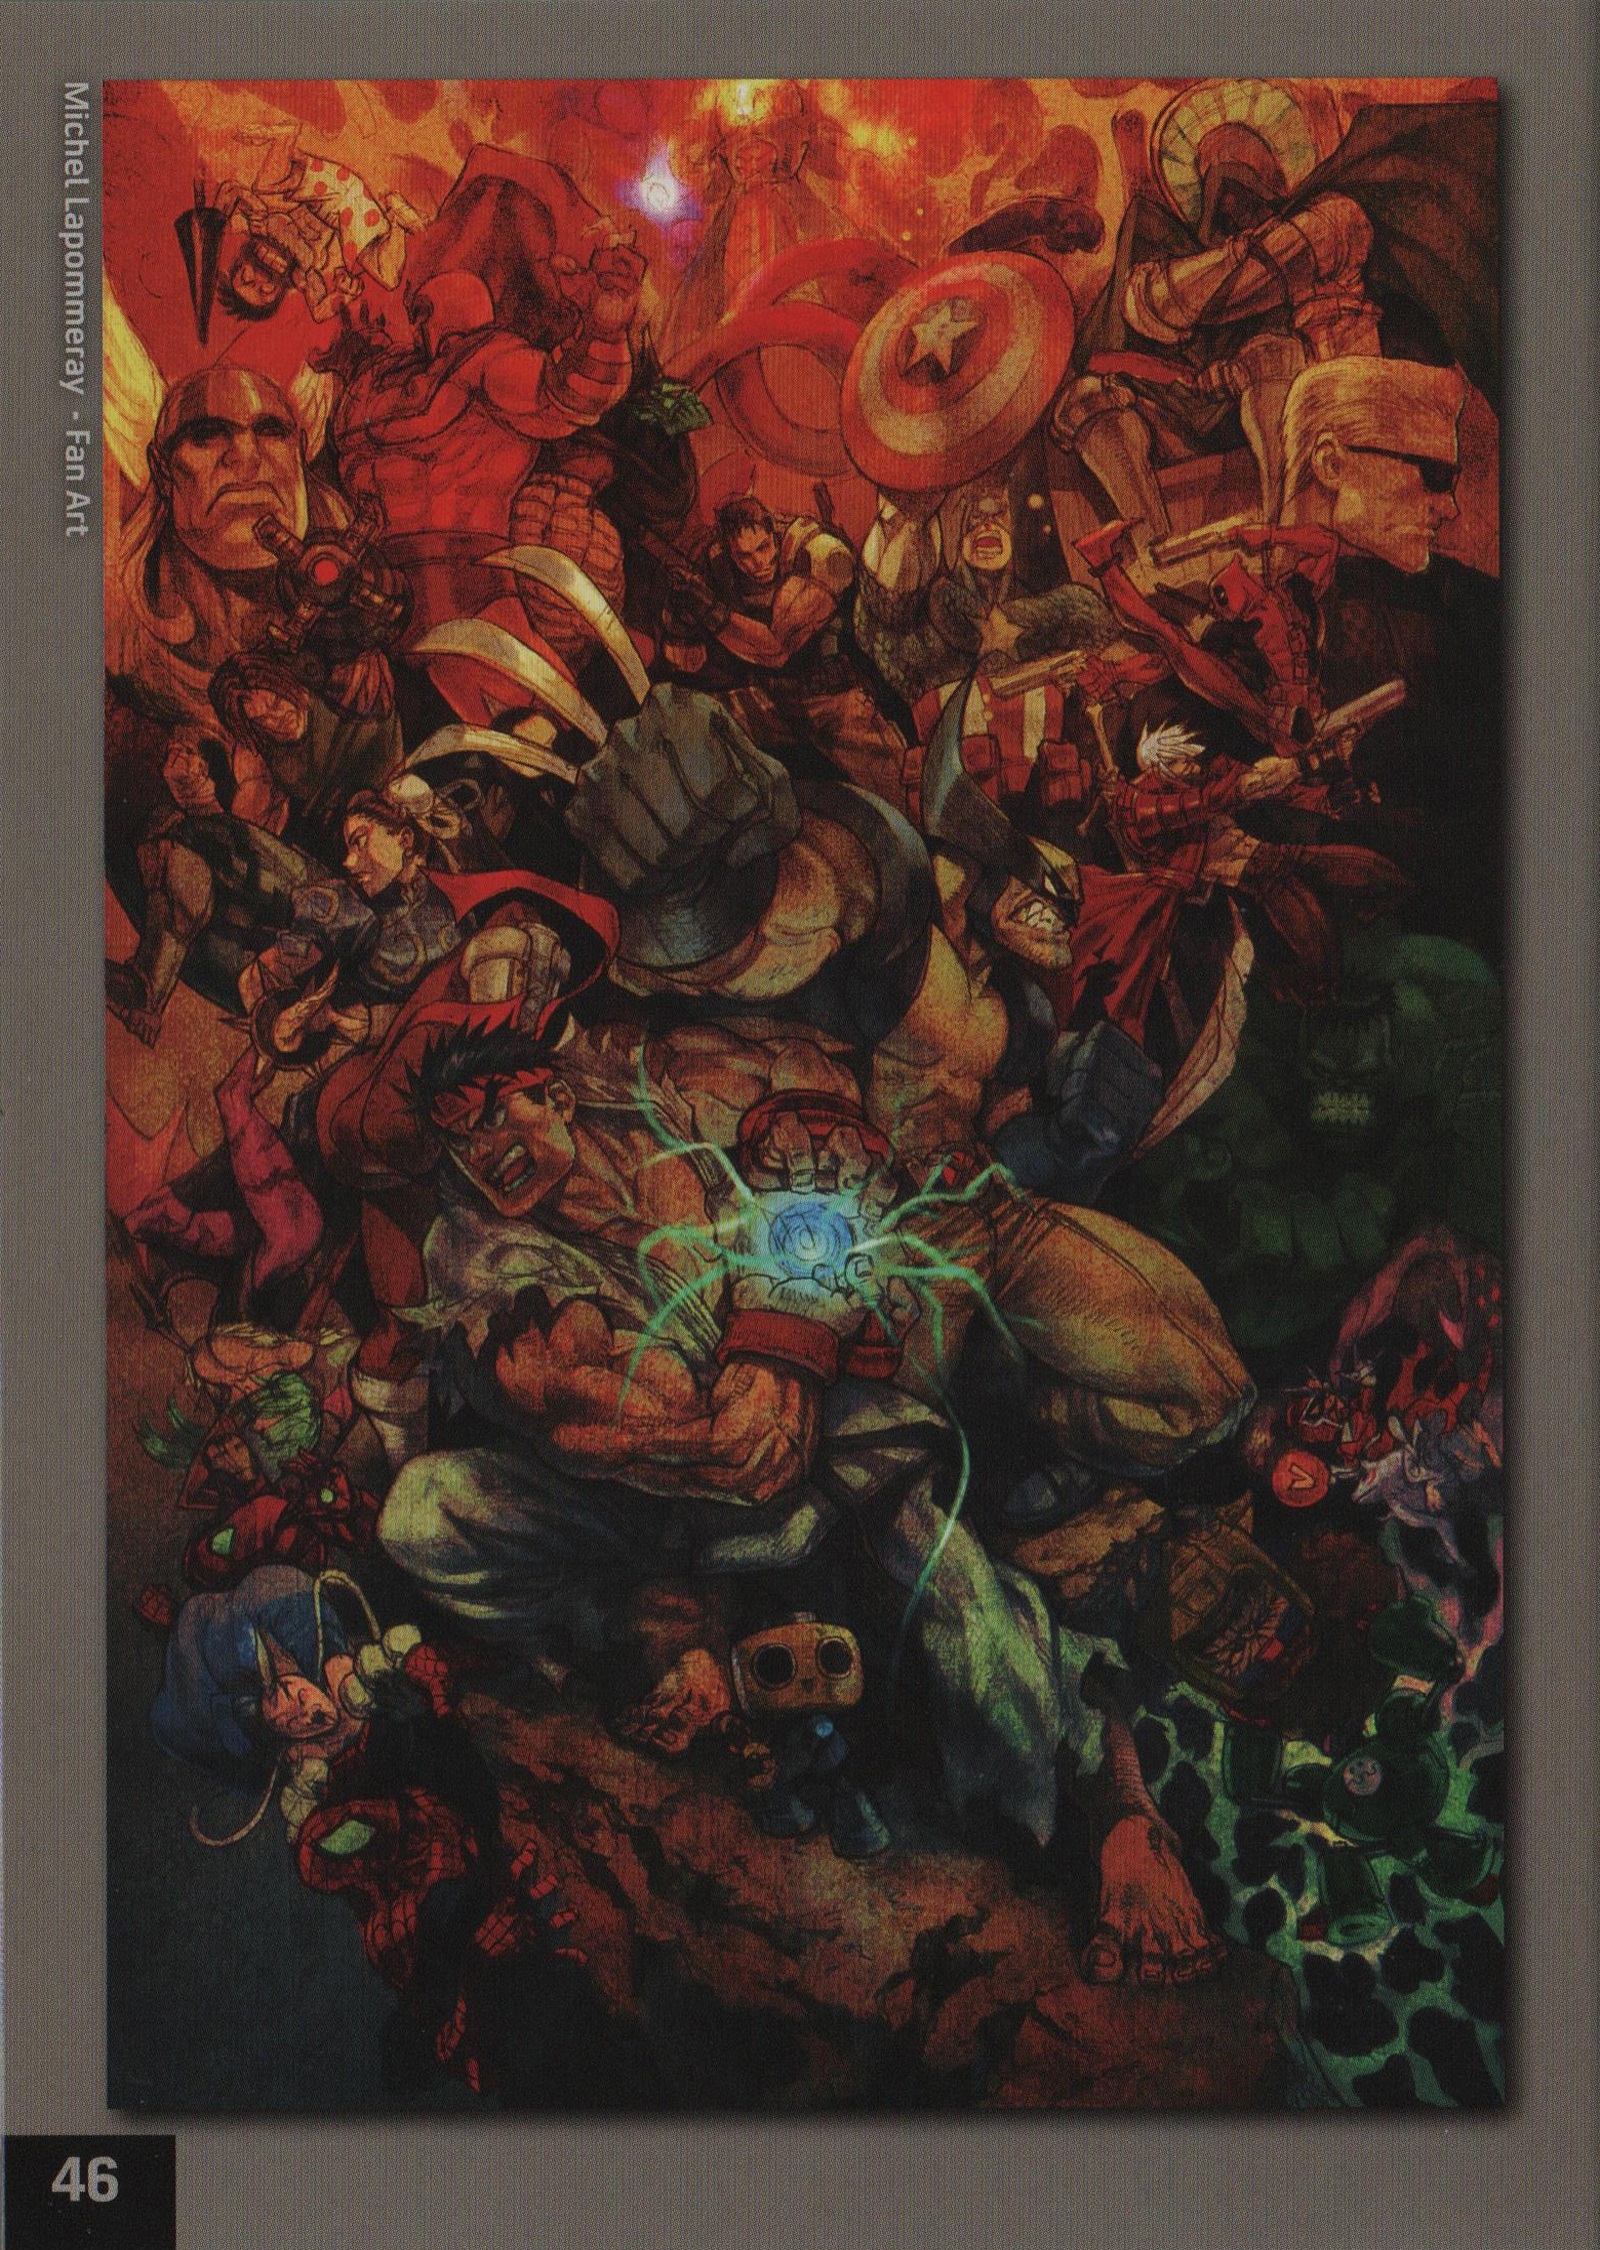 Read online Marvel vs Capcom 3: Fate of Two Worlds comic -  Issue # Full - 46